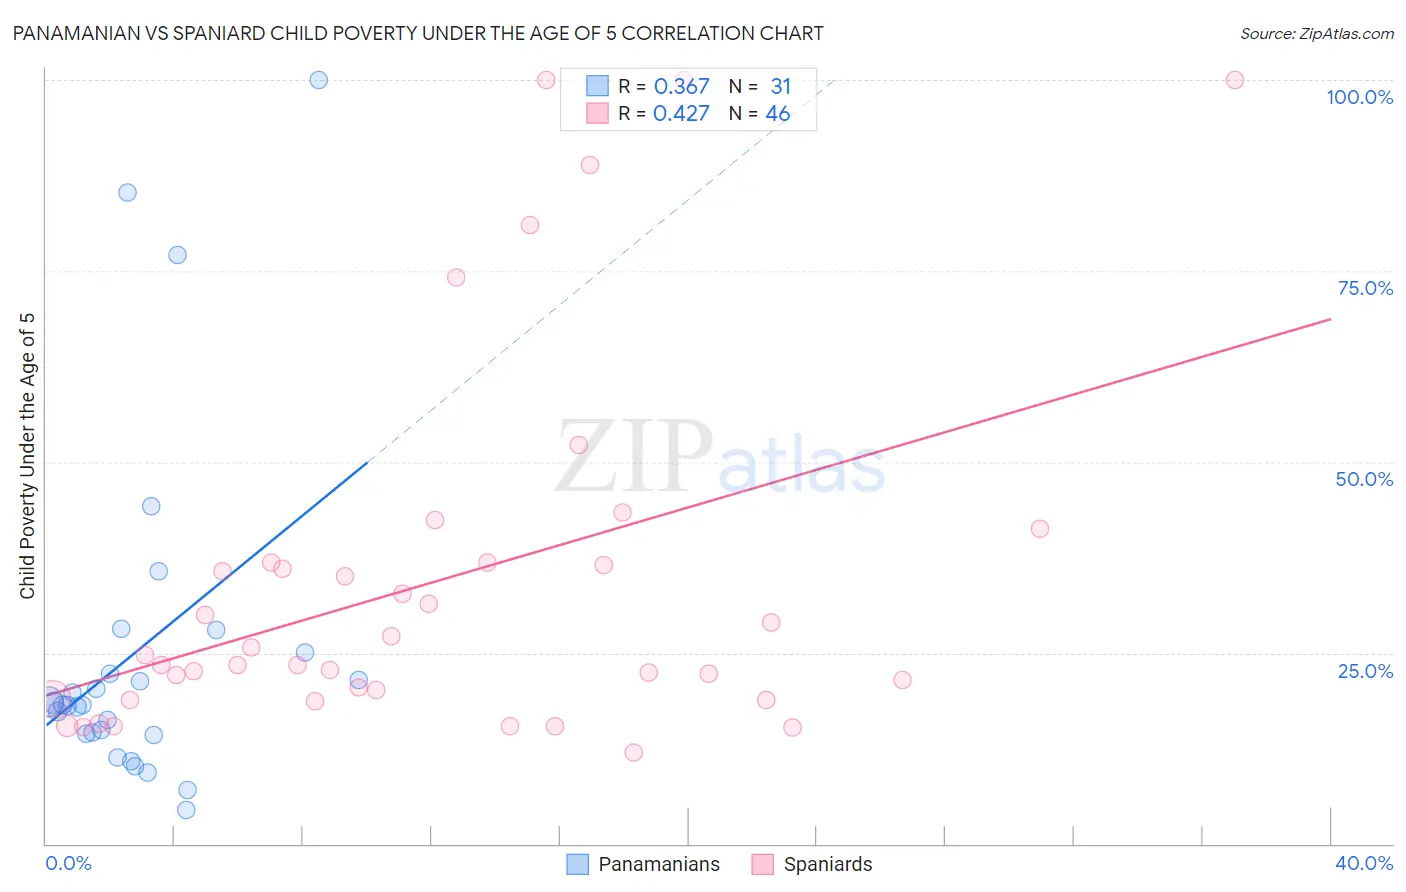 Panamanian vs Spaniard Child Poverty Under the Age of 5